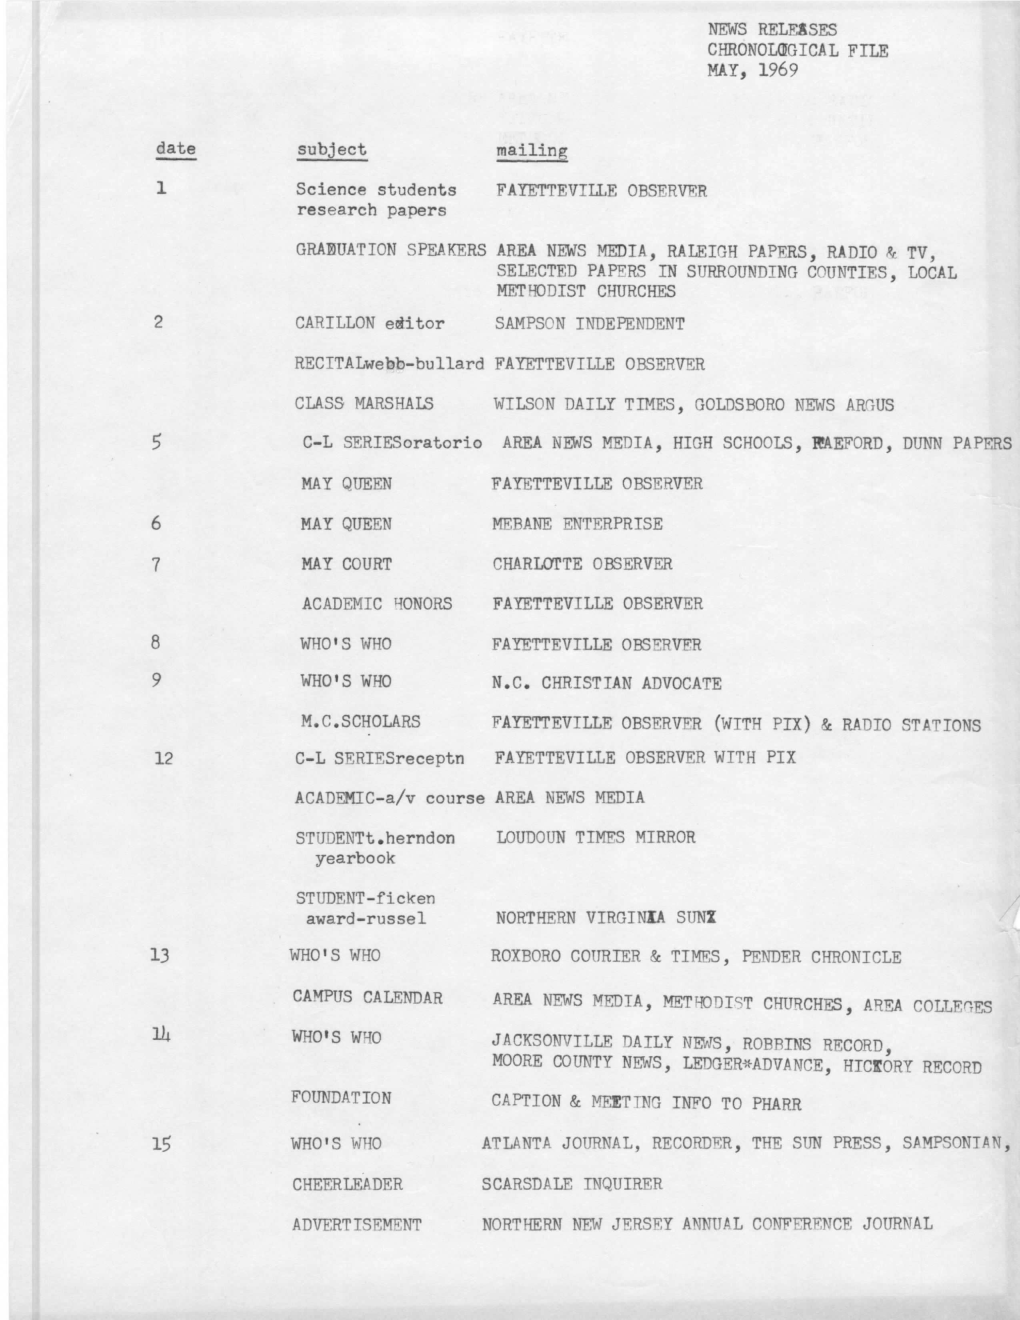 News Releases Chronological File May, 1969